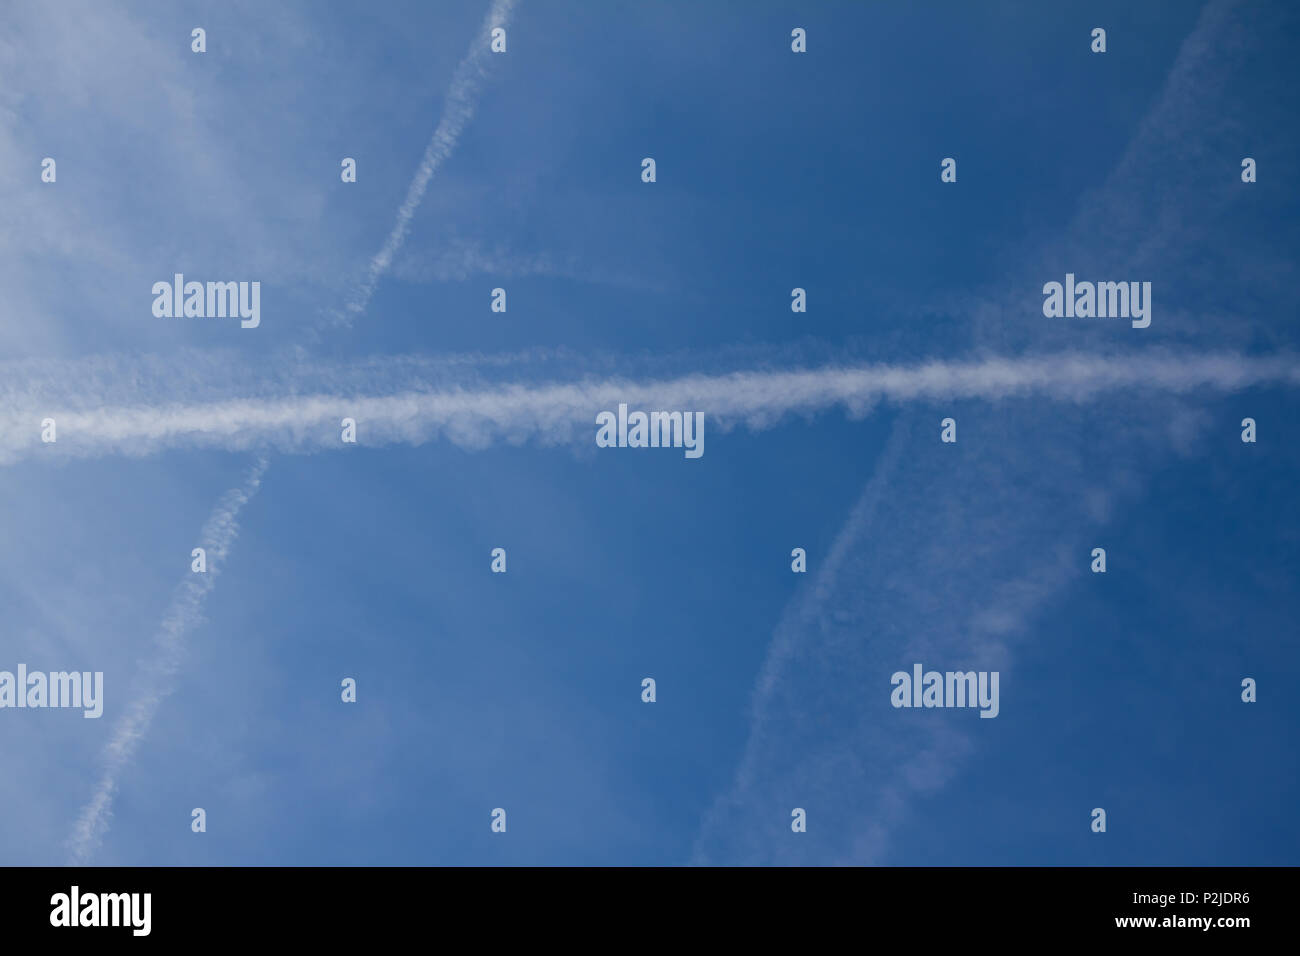 Environmental pollution by planes - chemtrails or contrails Stock Photo